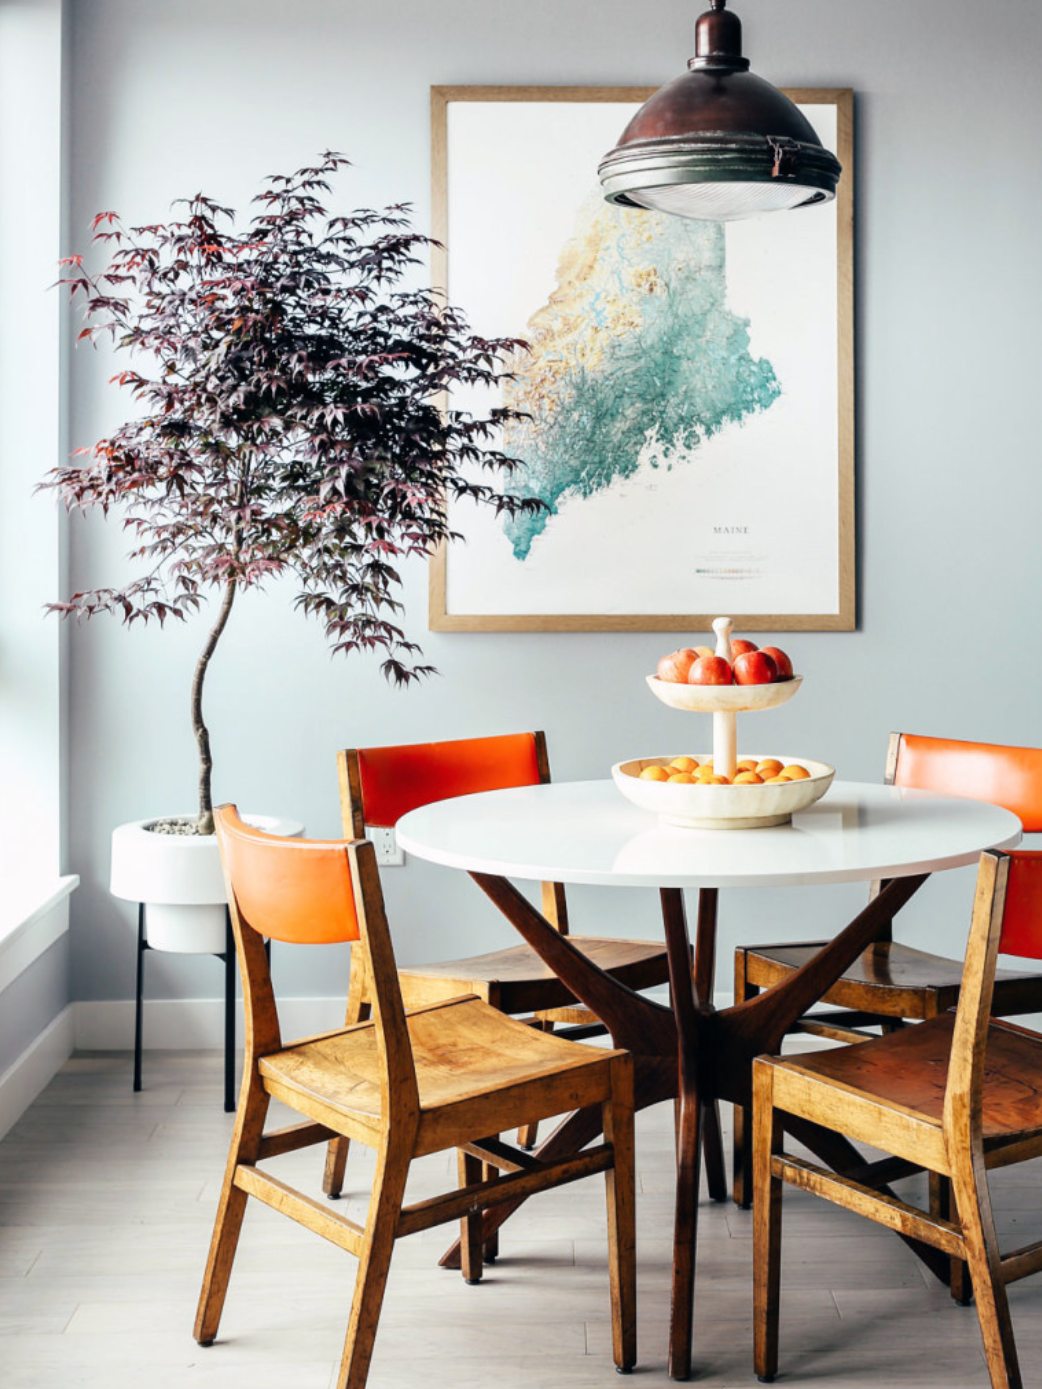 The Cheeky Wallpaper in This Portland Home Will Make You Look Twice